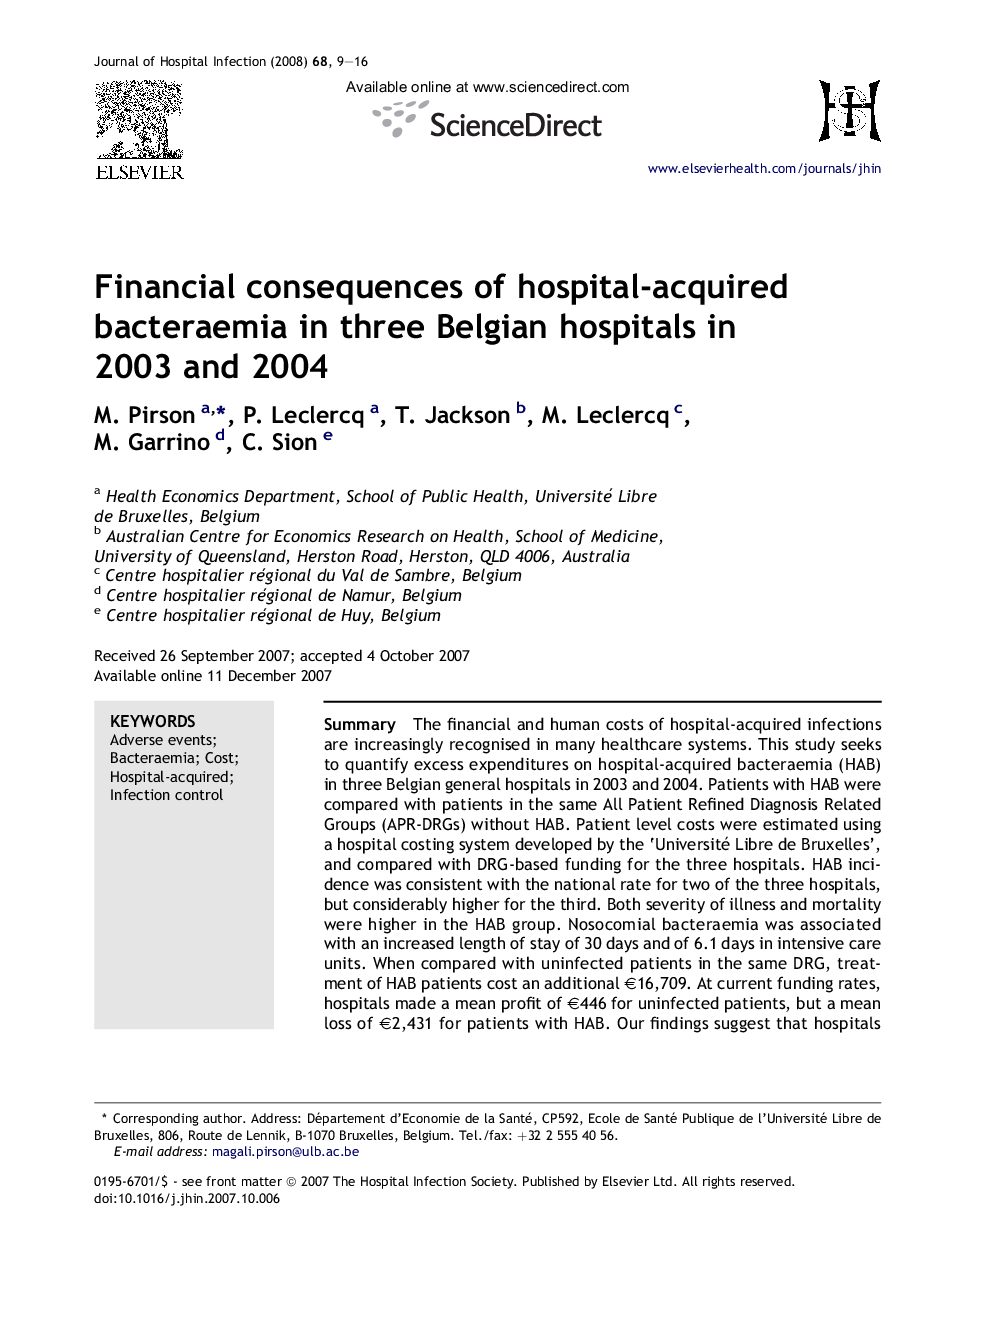 Financial consequences of hospital-acquired bacteraemia in three Belgian hospitals in 2003 and 2004